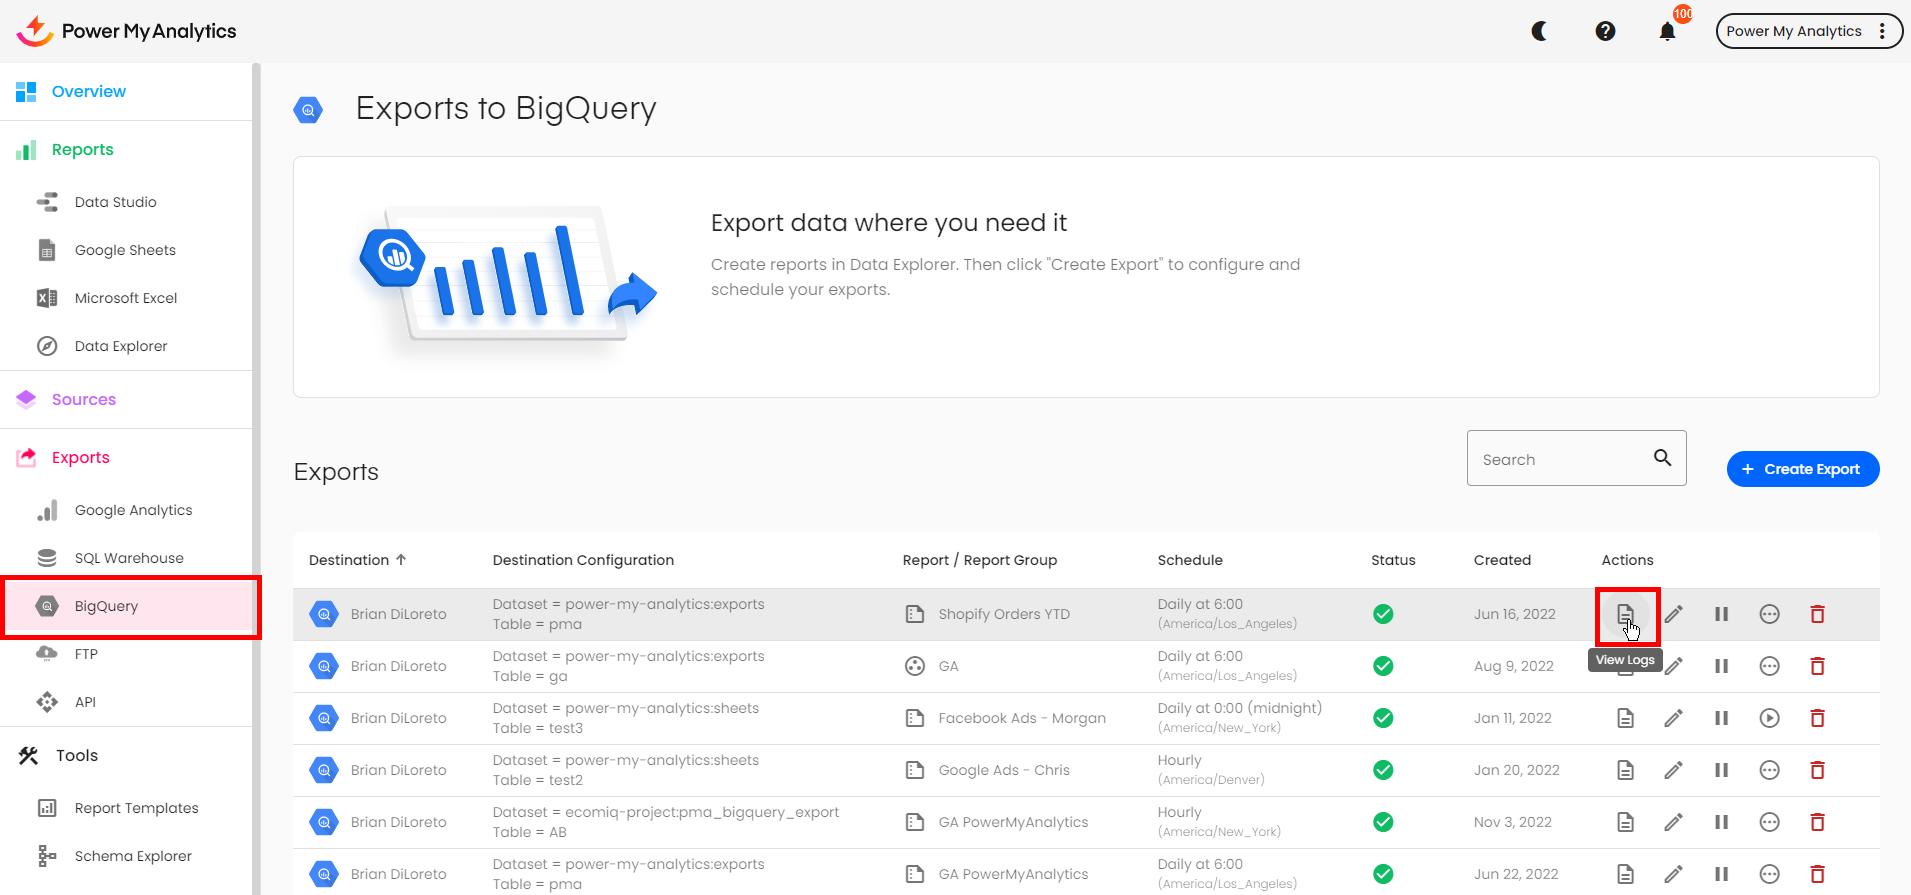 The BigQuery section of the Power My Analytics hub, under Exports.